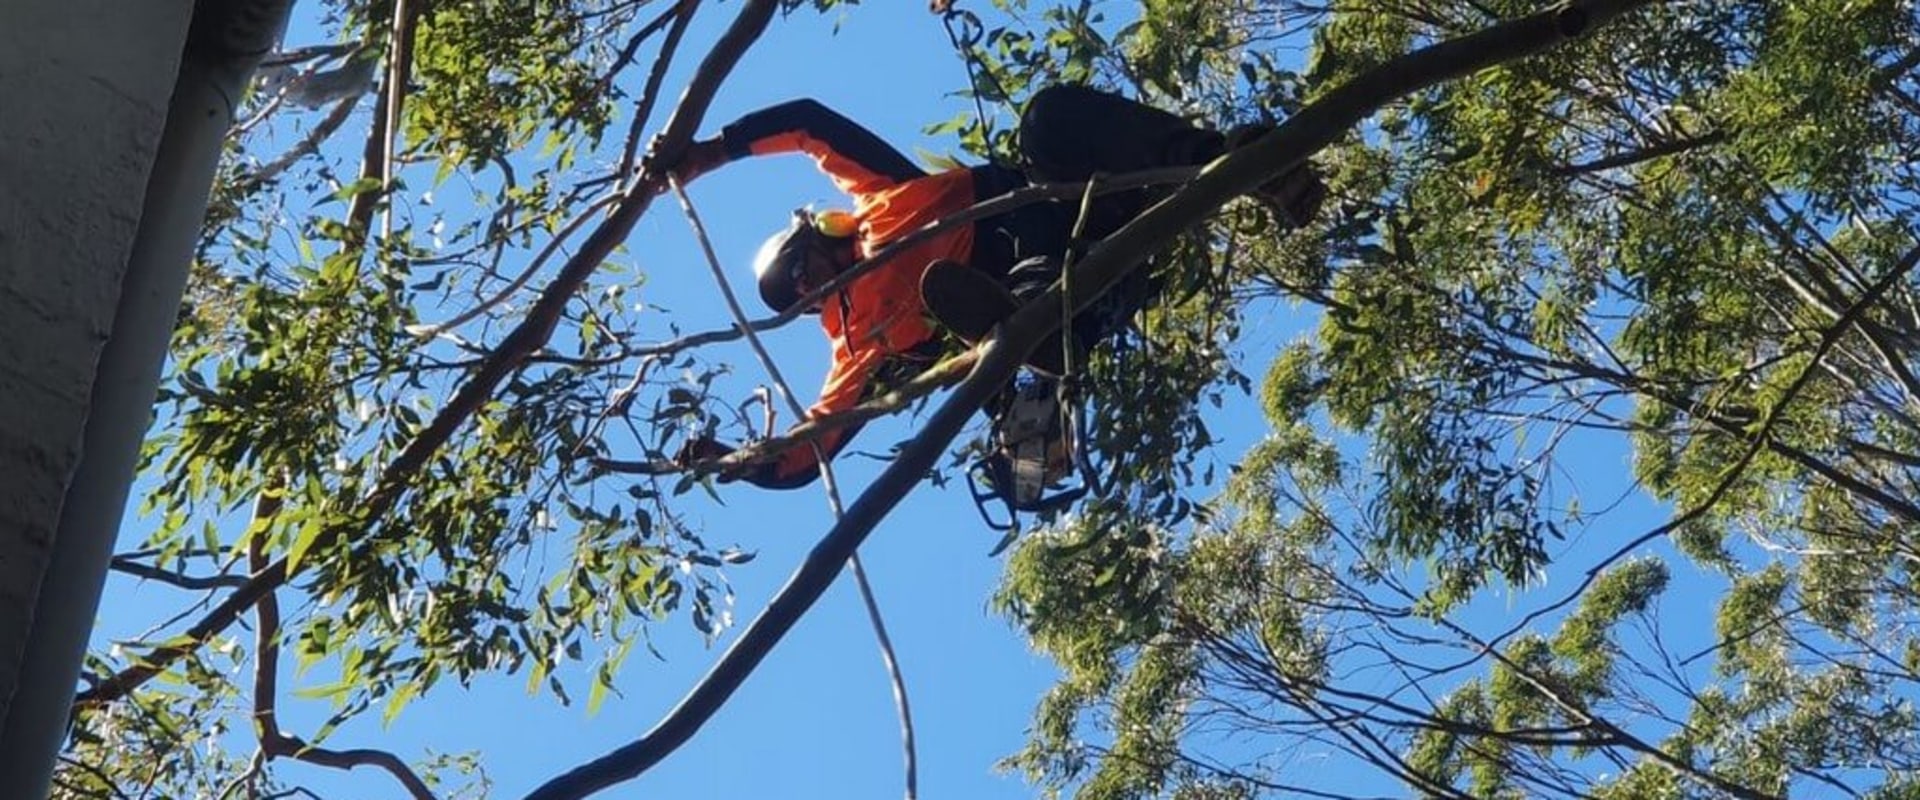 What isa tree service person called?